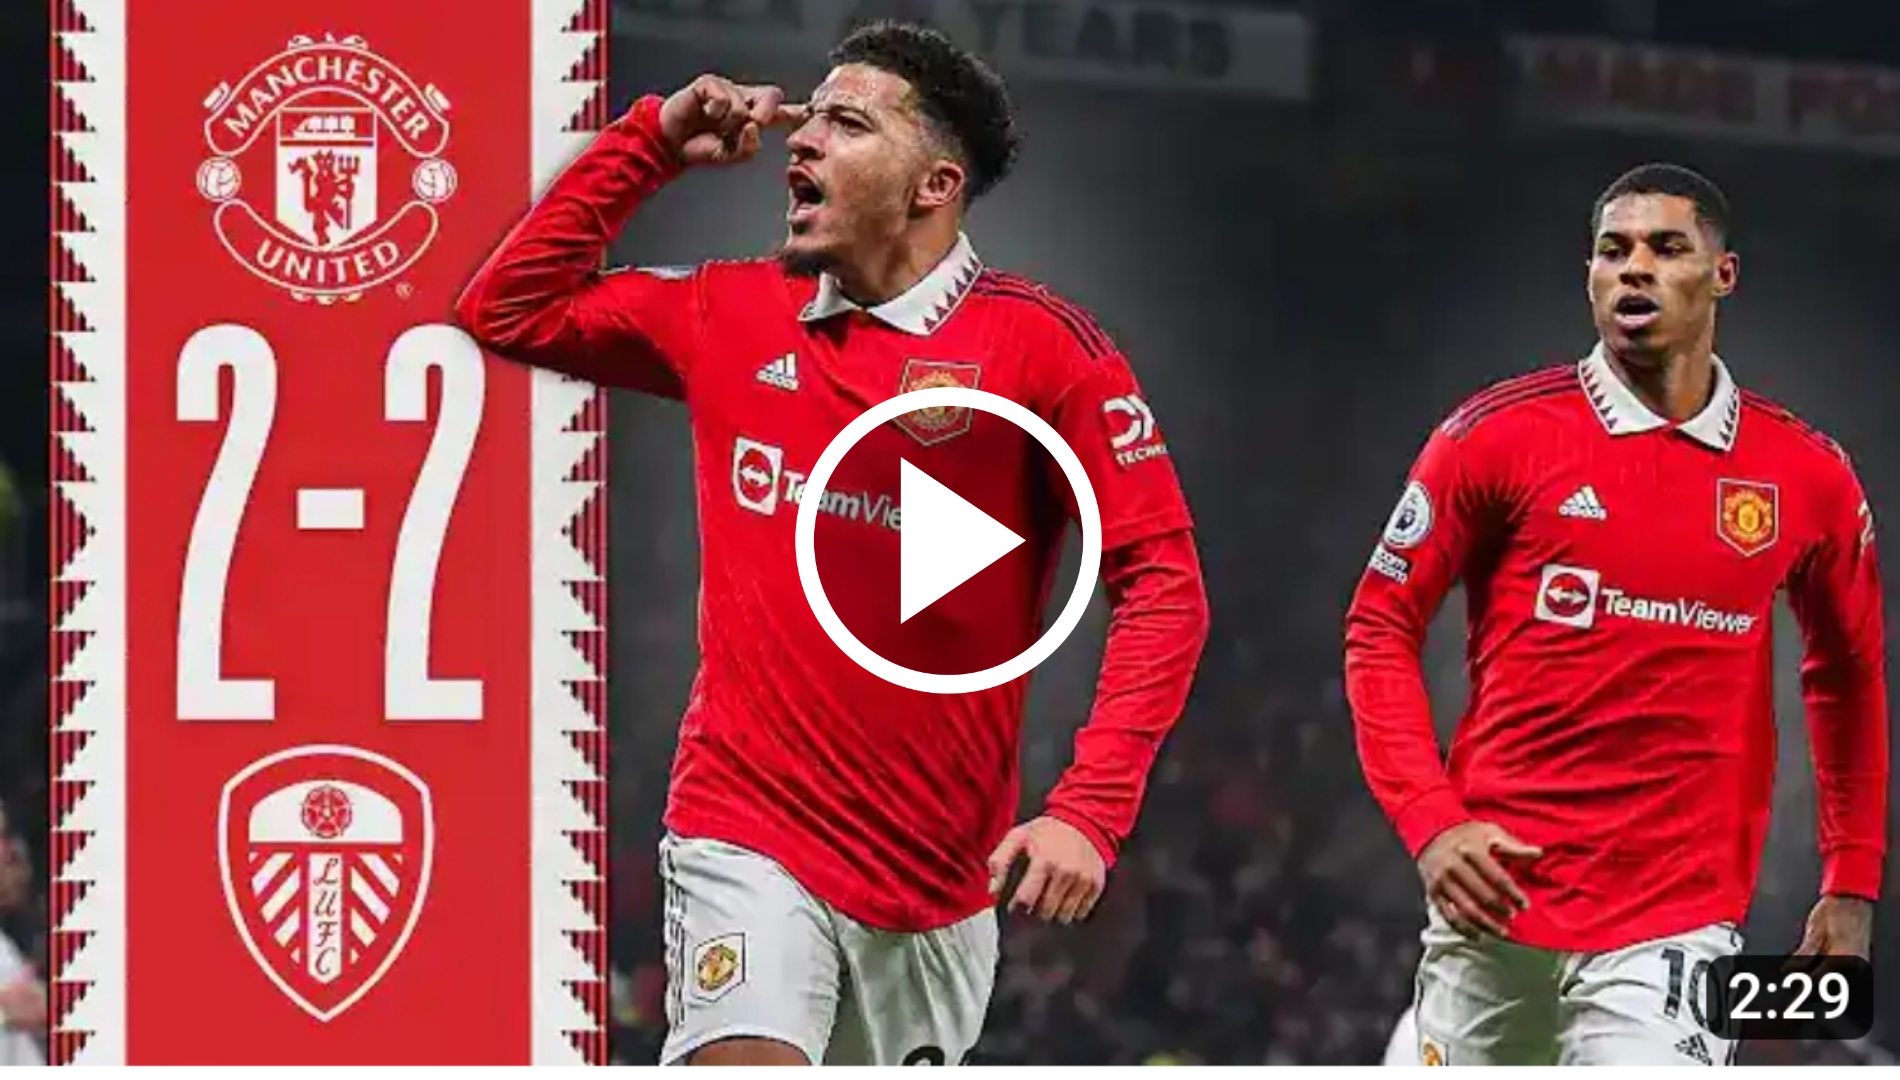 Highlights: Watch Man United vs Leeds united (2-2) extended highlights and goals 9 Sportelo